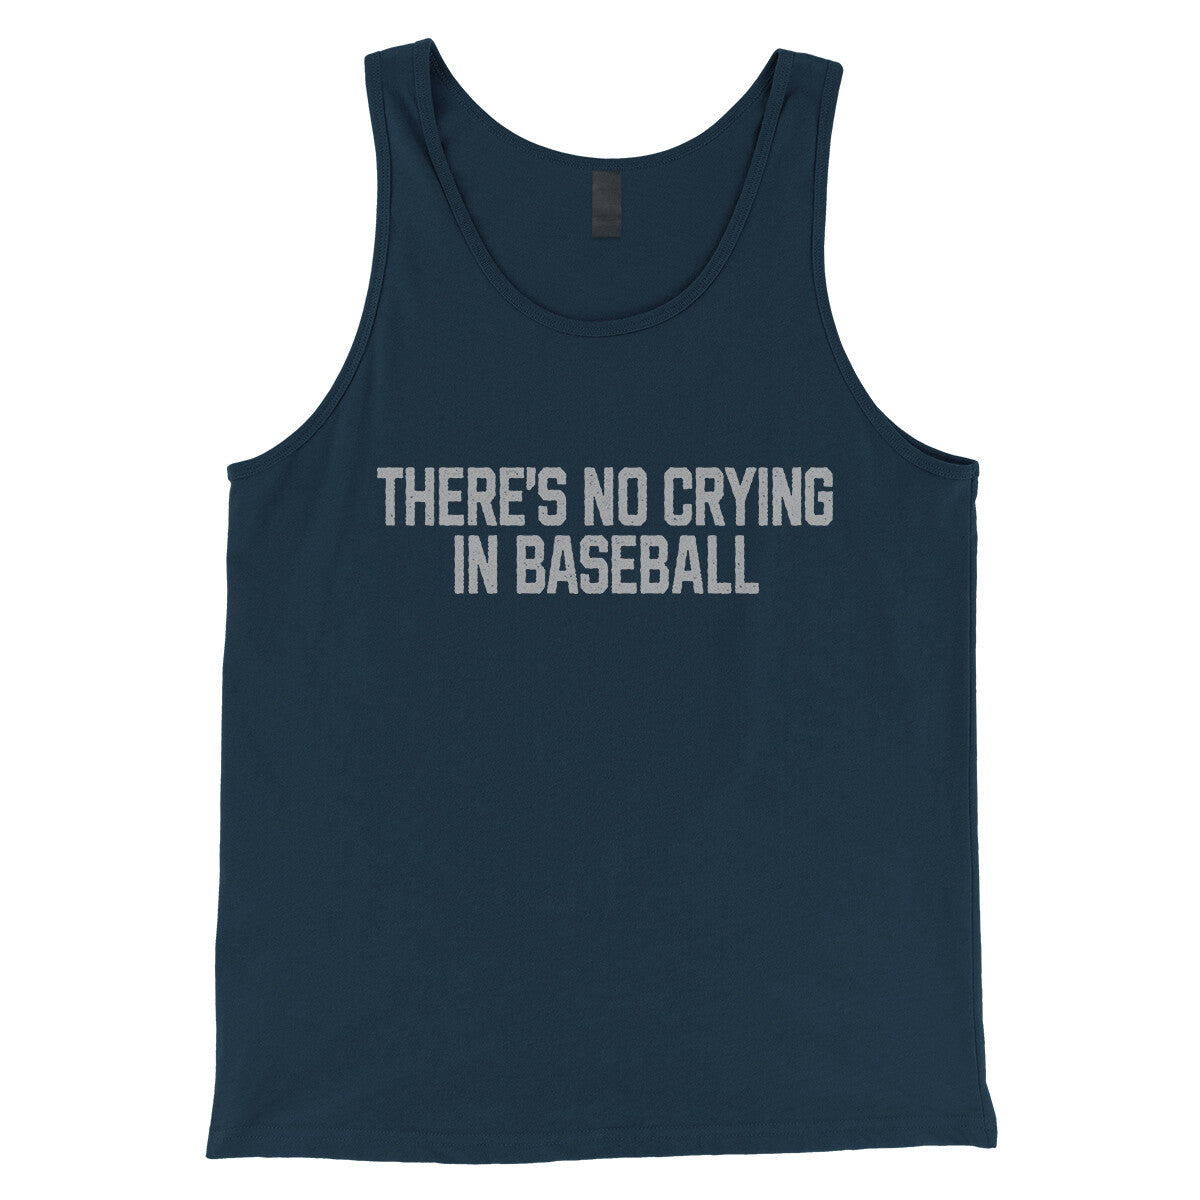 There's No Crying in Baseball in Navy Color